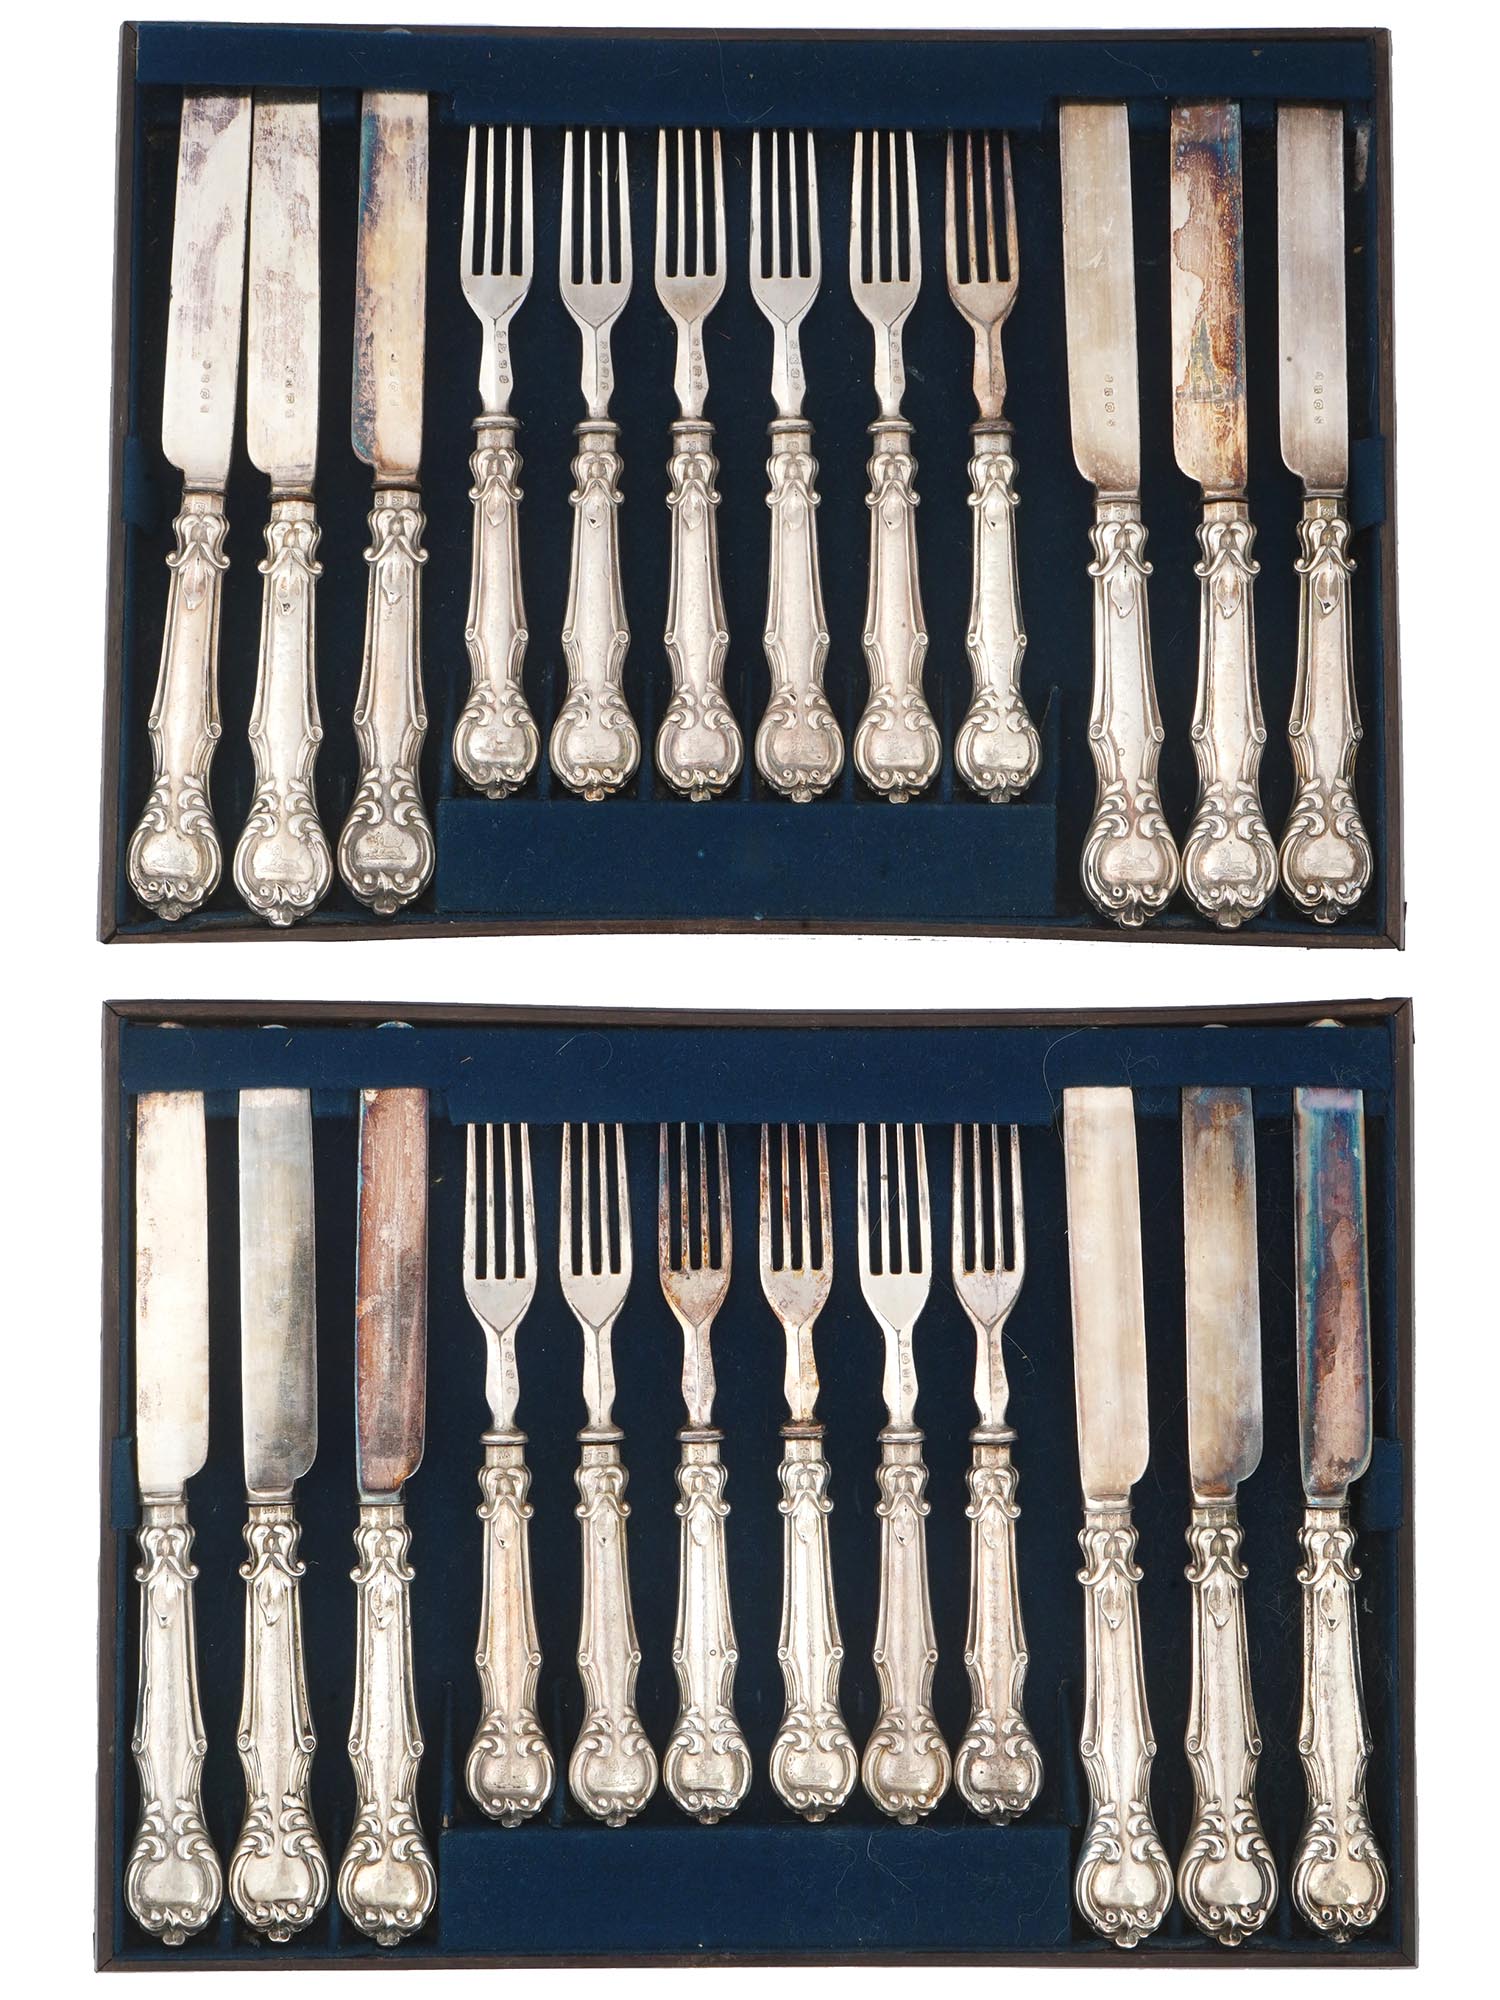 EARLY 20TH C ENGLISH STERLING SILVER FLATWARE SET PIC-1